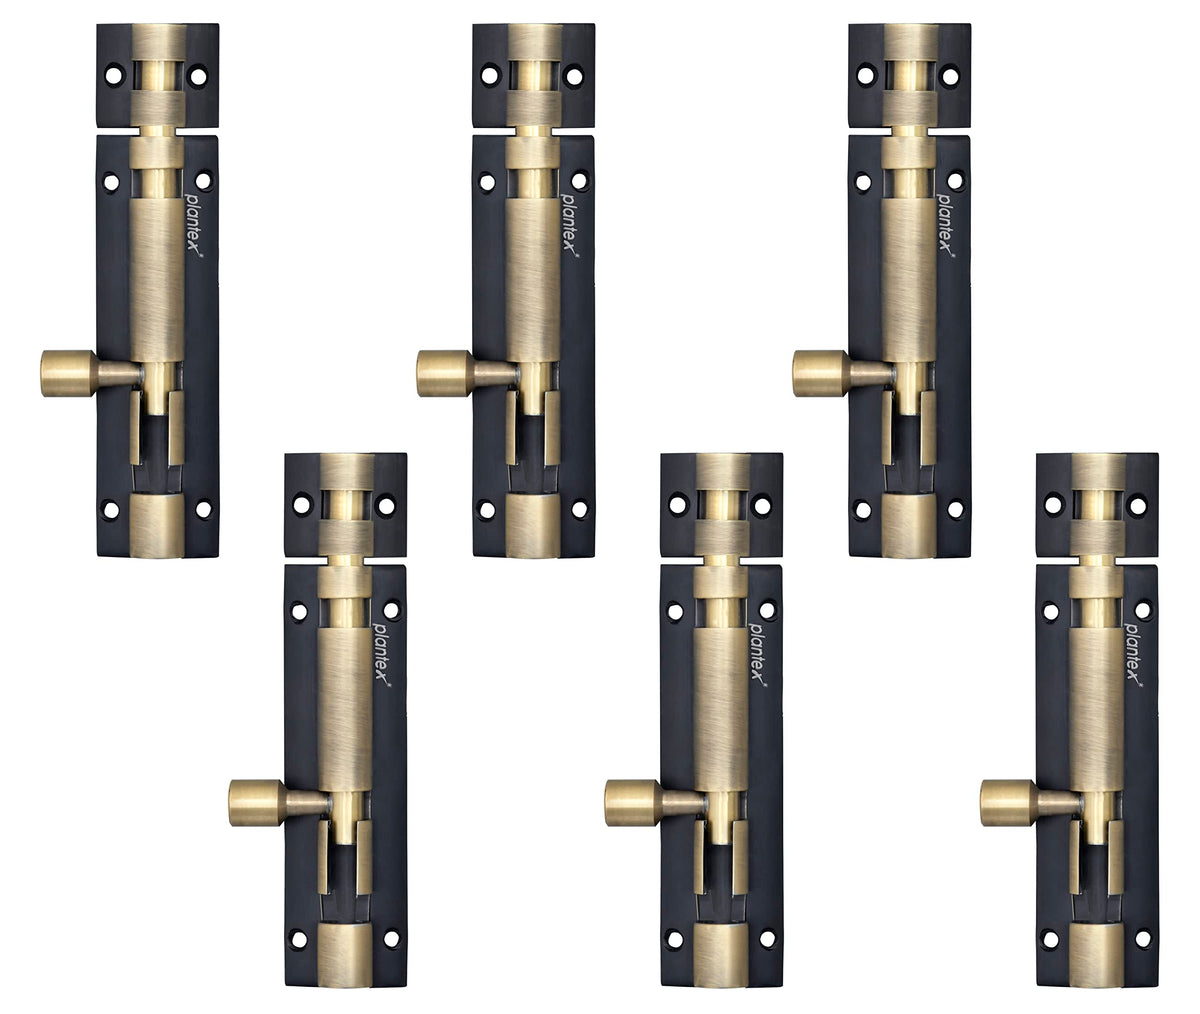 Plantex Heavy Duty 4-inch Joint-Less Tower Bolt for Wooden and PVC Doors for Home Main Door/Bathroom/Windows/Wardrobe - Pack of 6 (703, Brass Antique and Black)